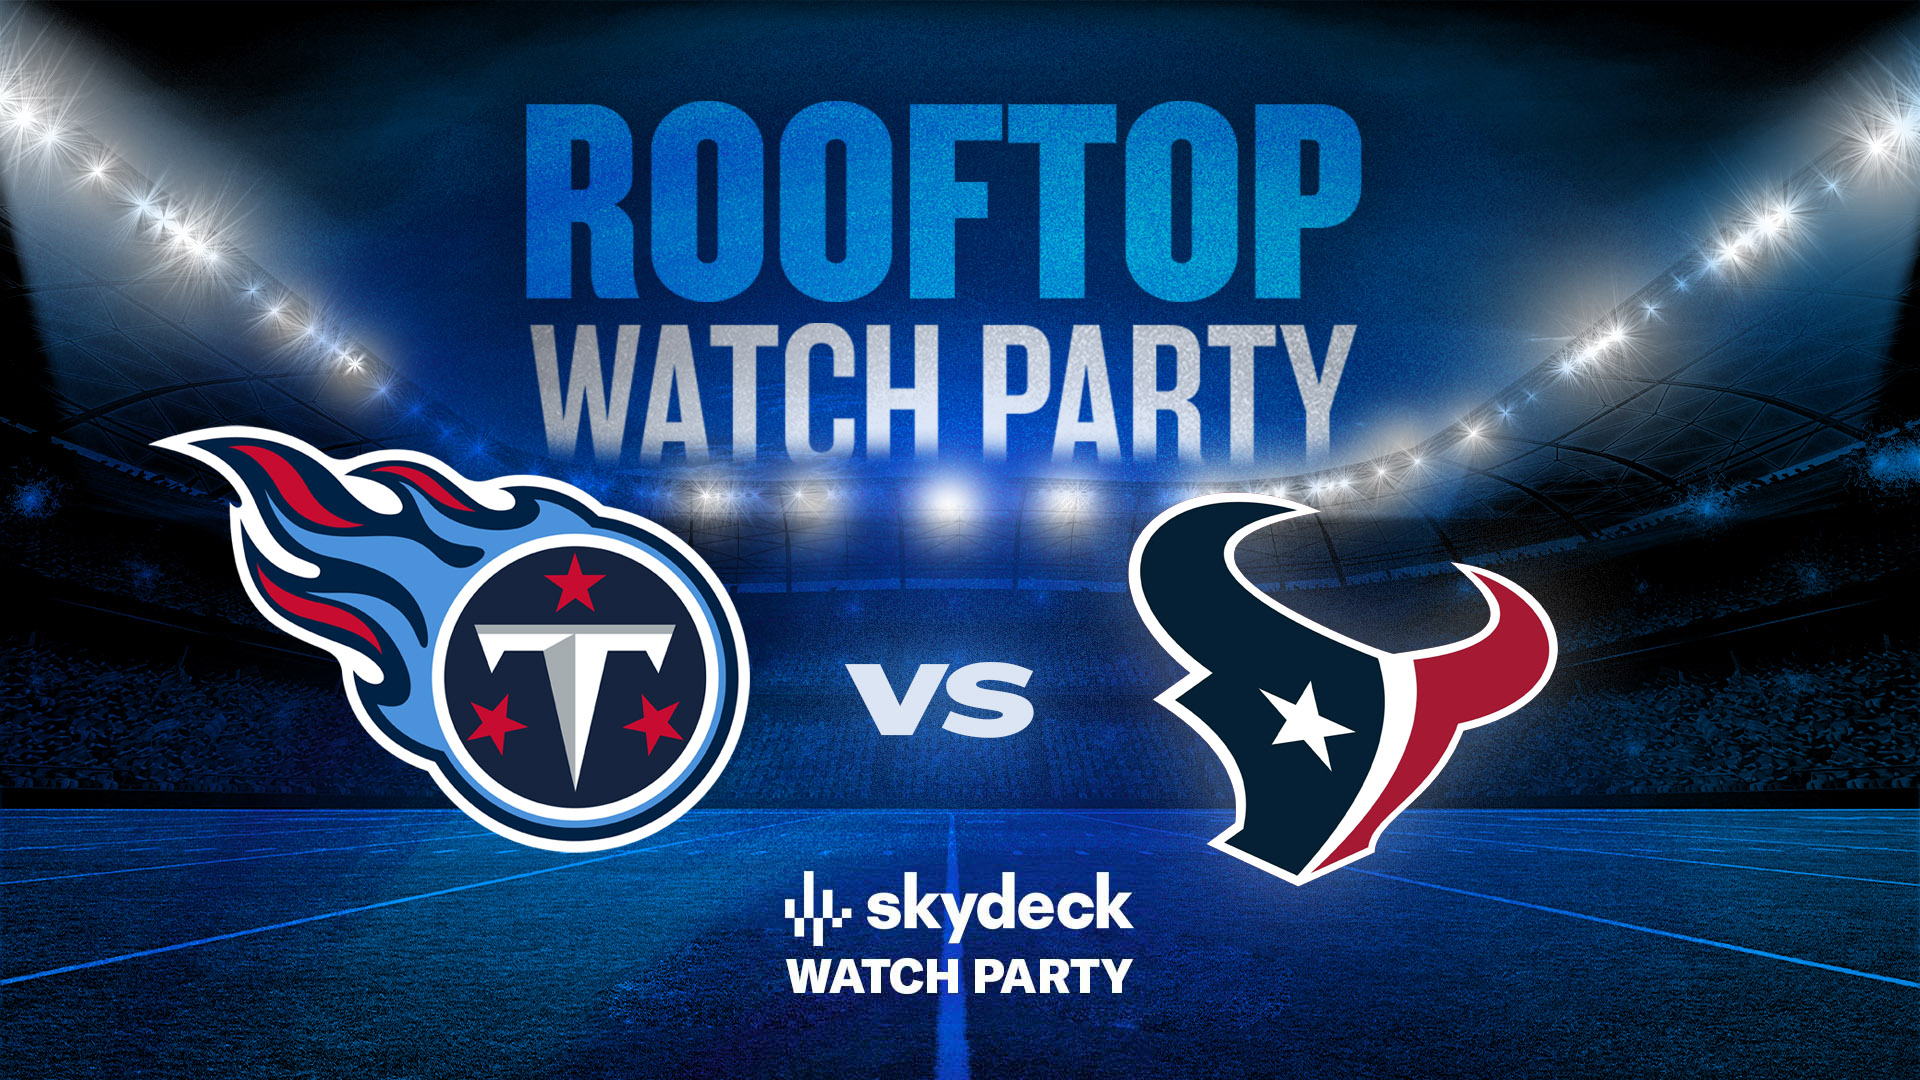 Promo image of Titans vs. Texans | Skydeck Watch Party